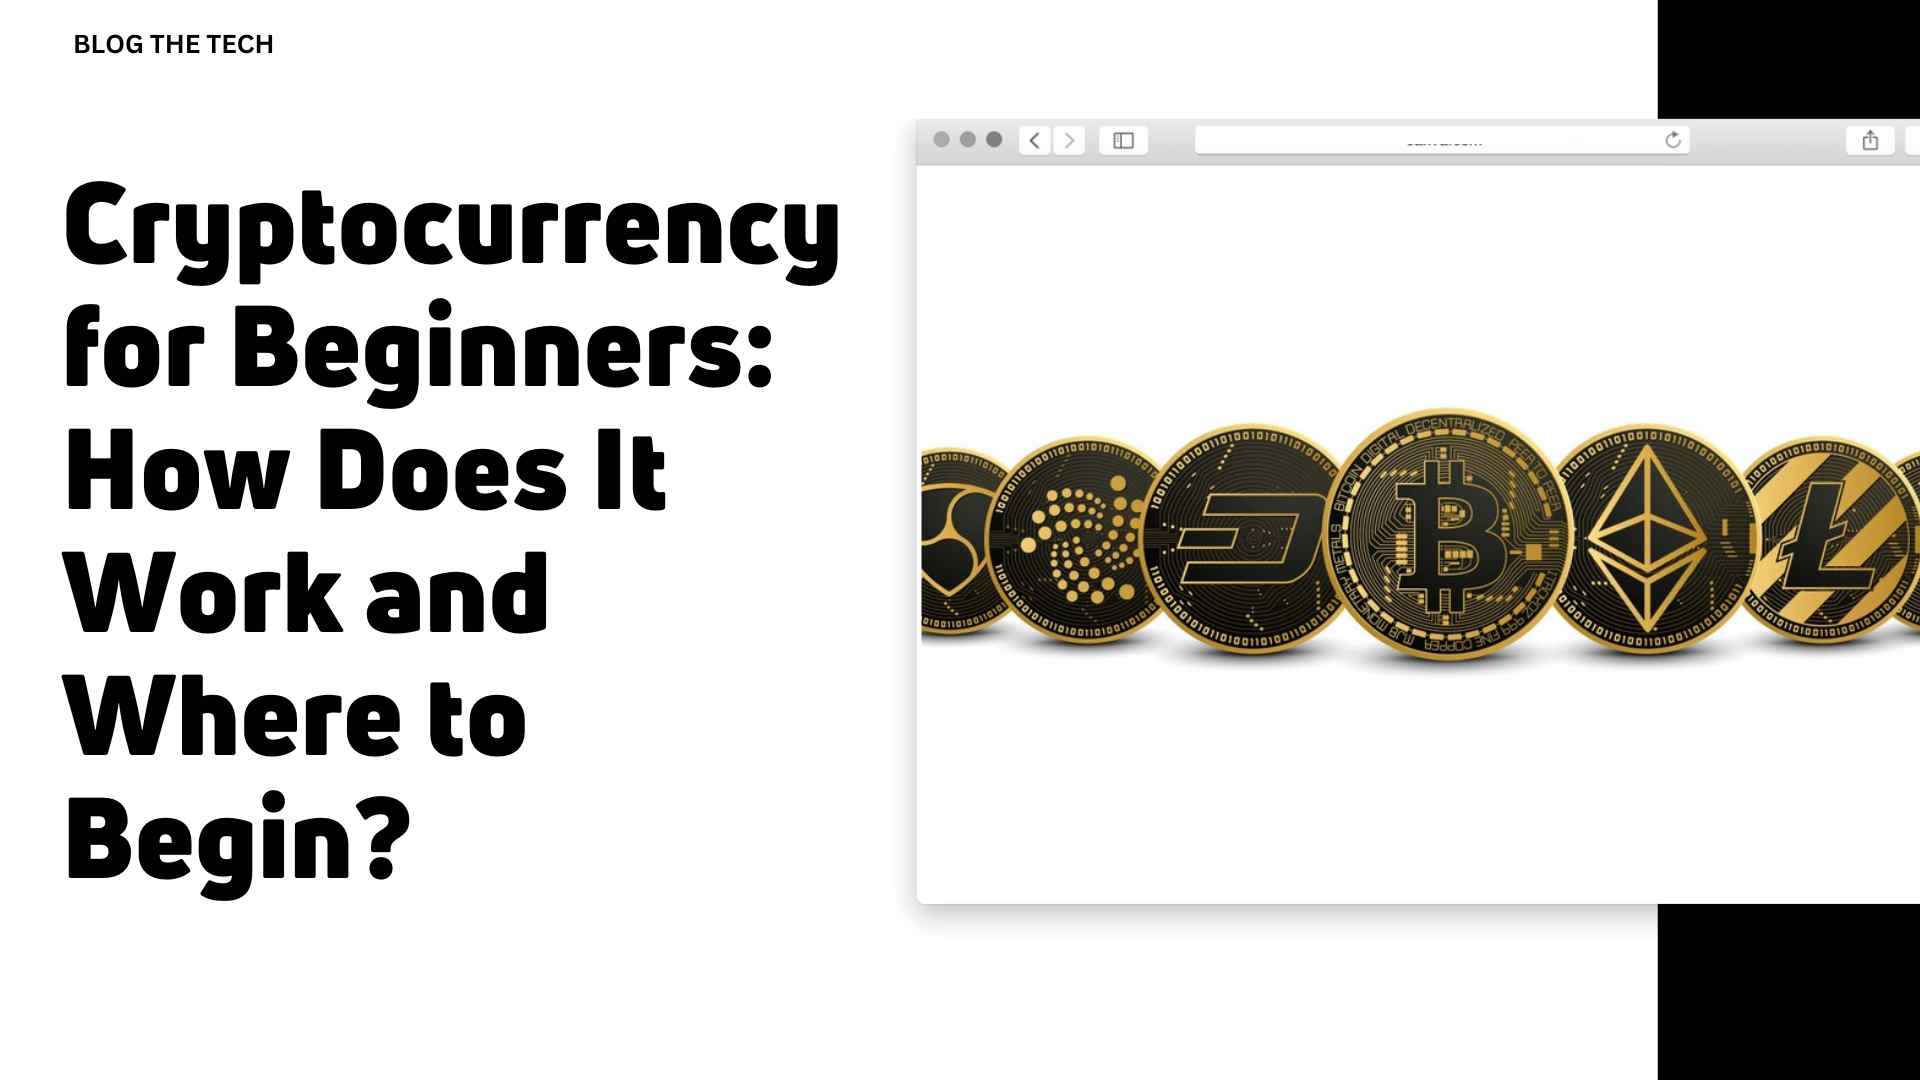 Cryptocurrency for Beginners: How Does It Work and Where to Begin?